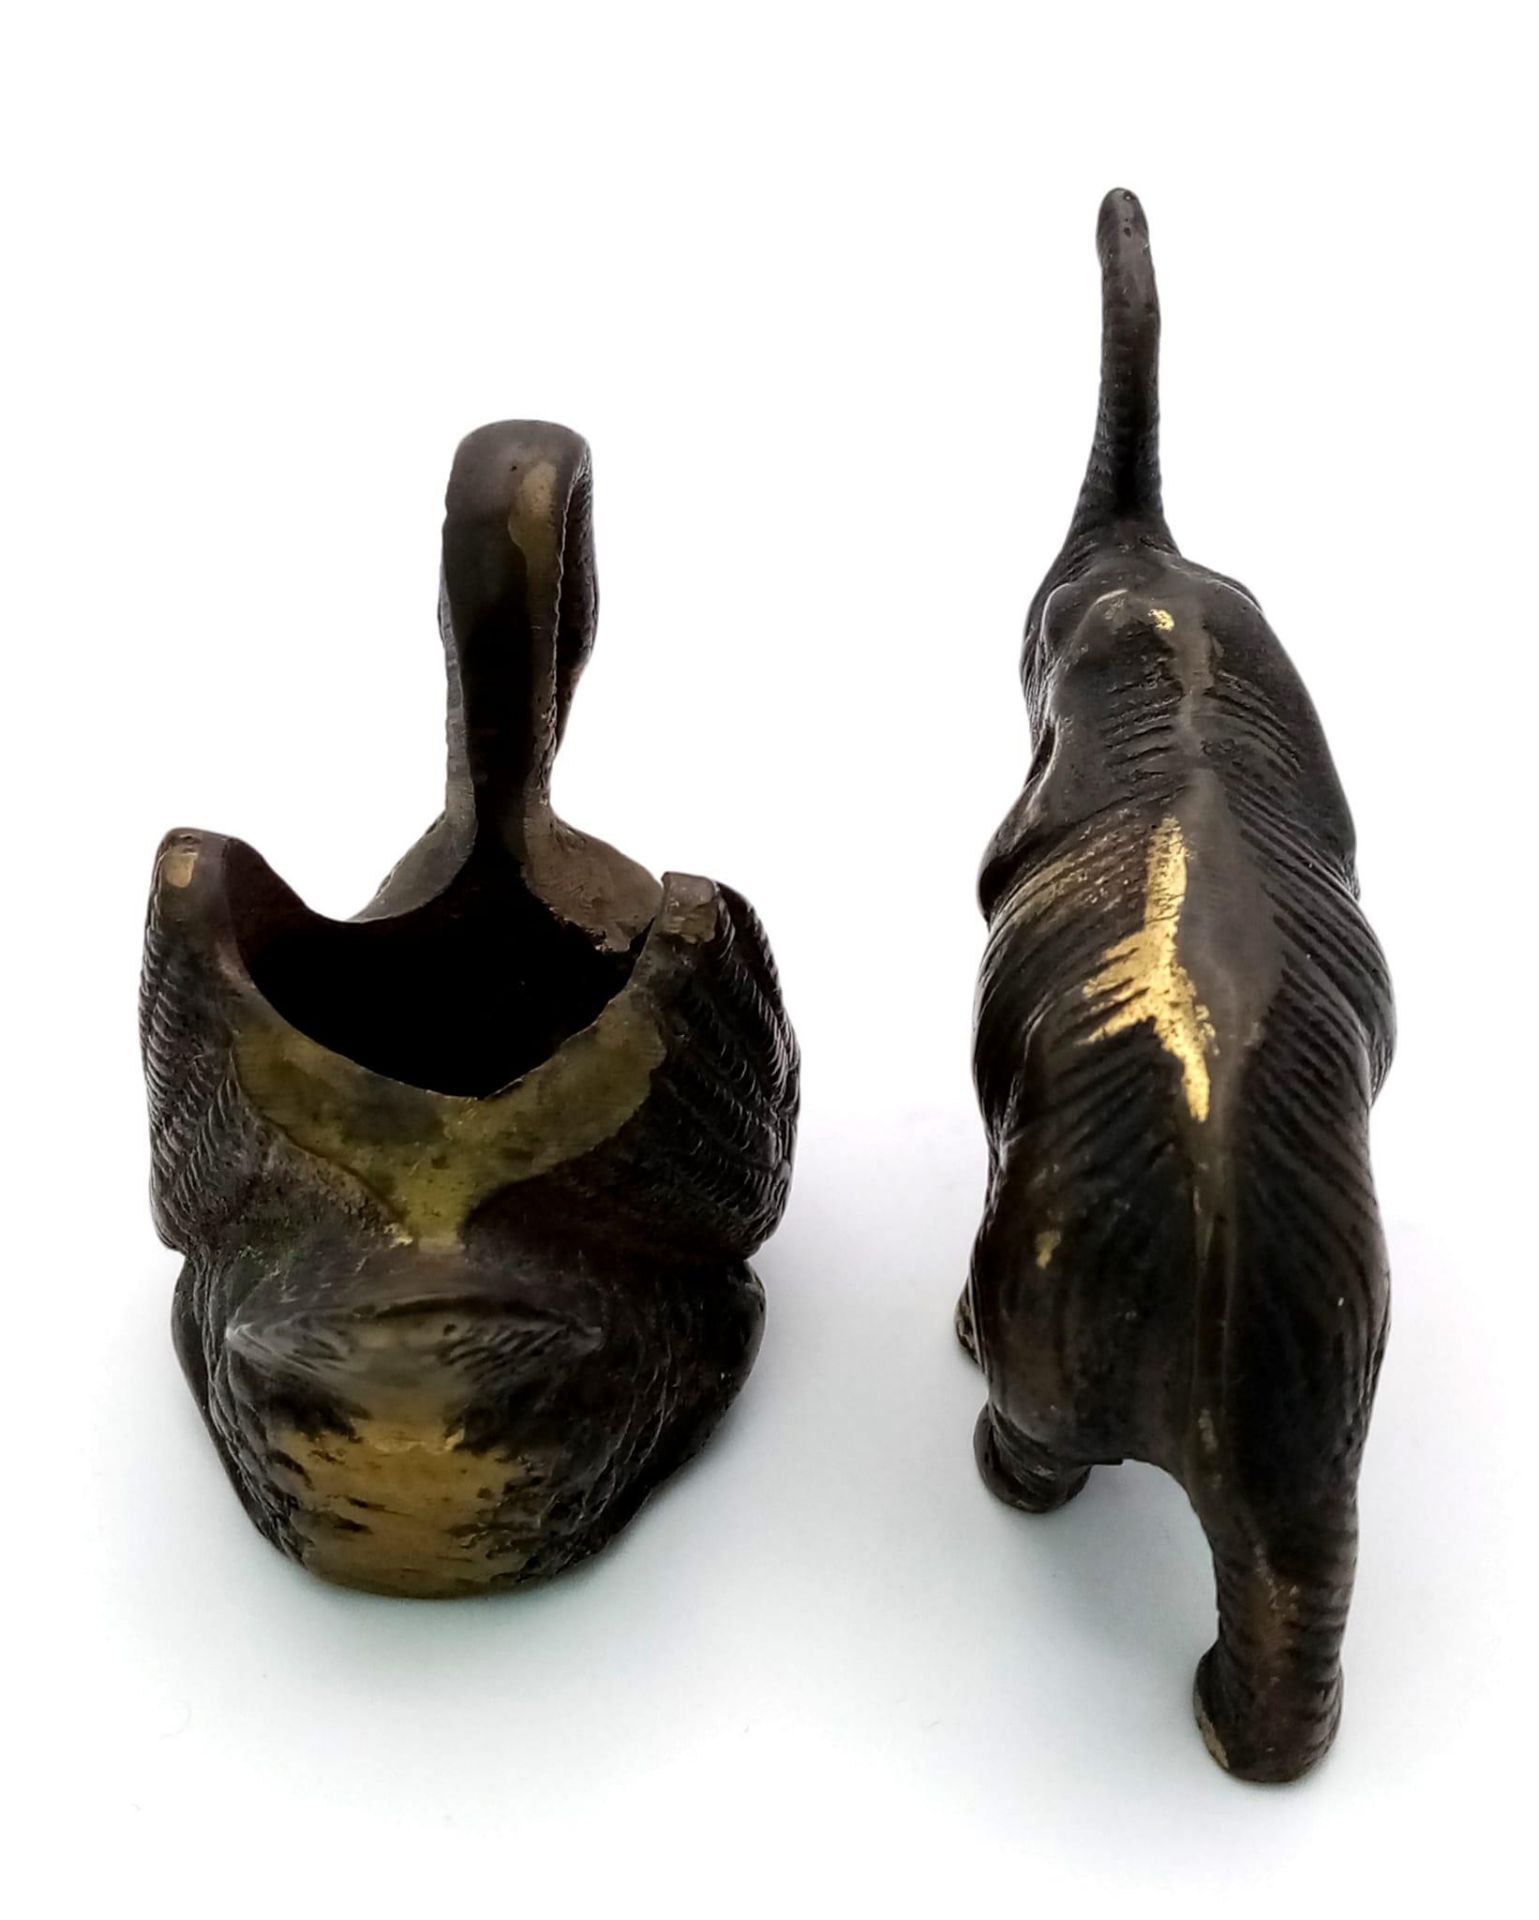 Two Small Vintage Brass Animal Figures. An Elephant and Swan - Both with wonderful patinas. Elephant - Image 7 of 7